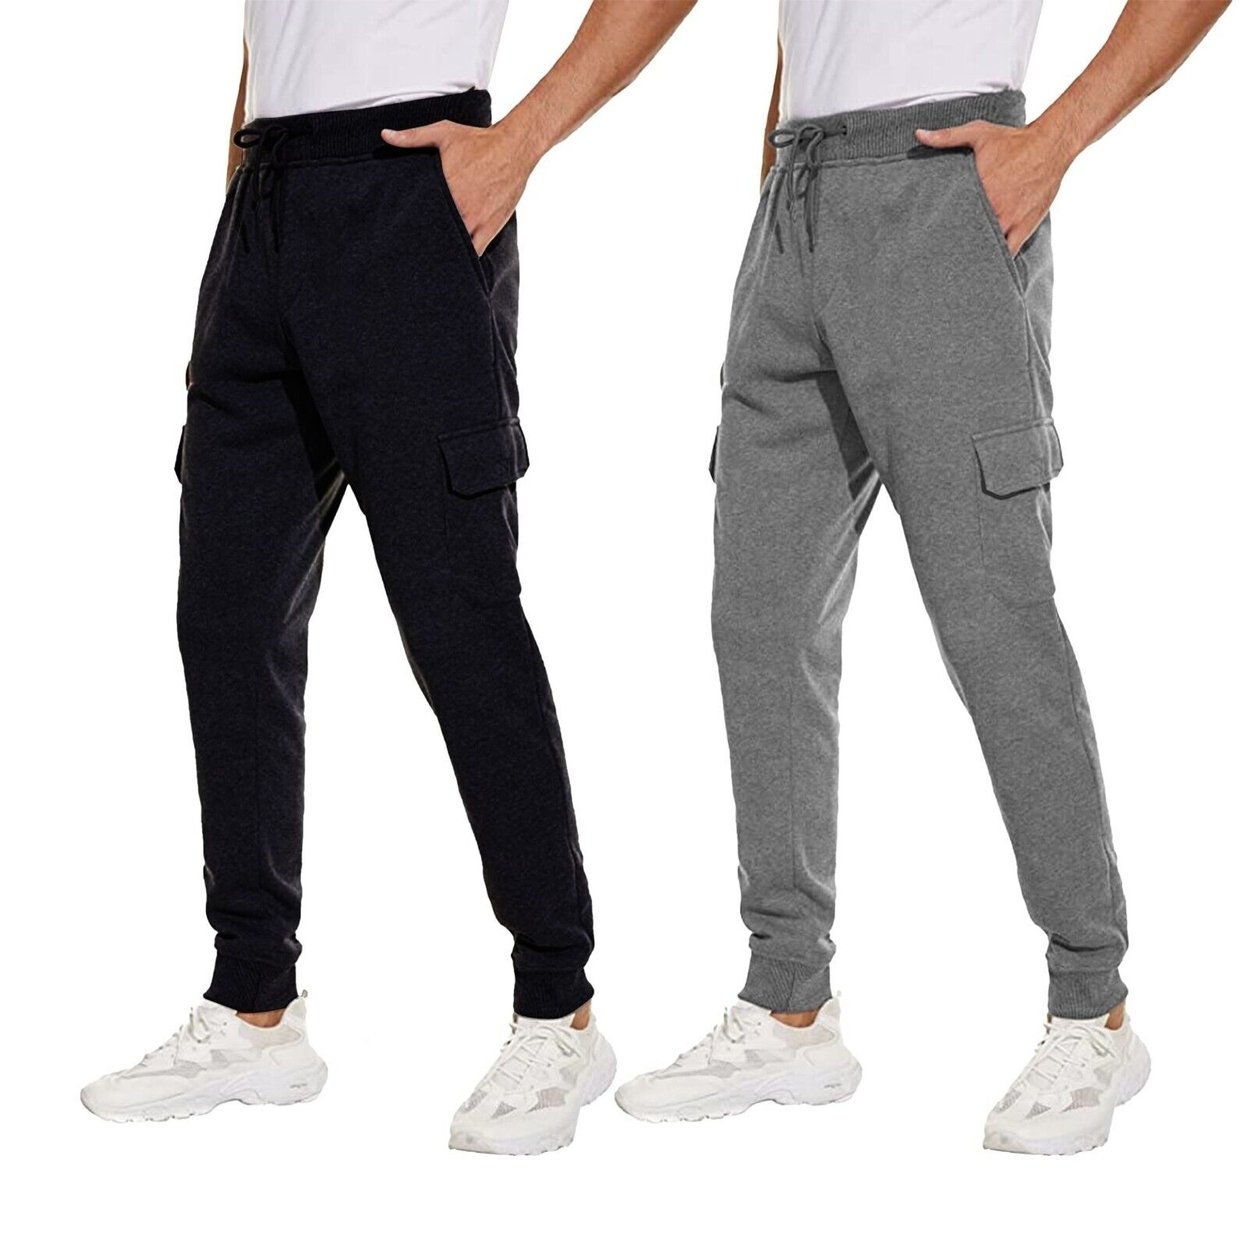 2-Pack Men's Ultra Soft Winter Warm Thick Athletic Sherpa Lined Jogger Pants - Black&grey, Medium